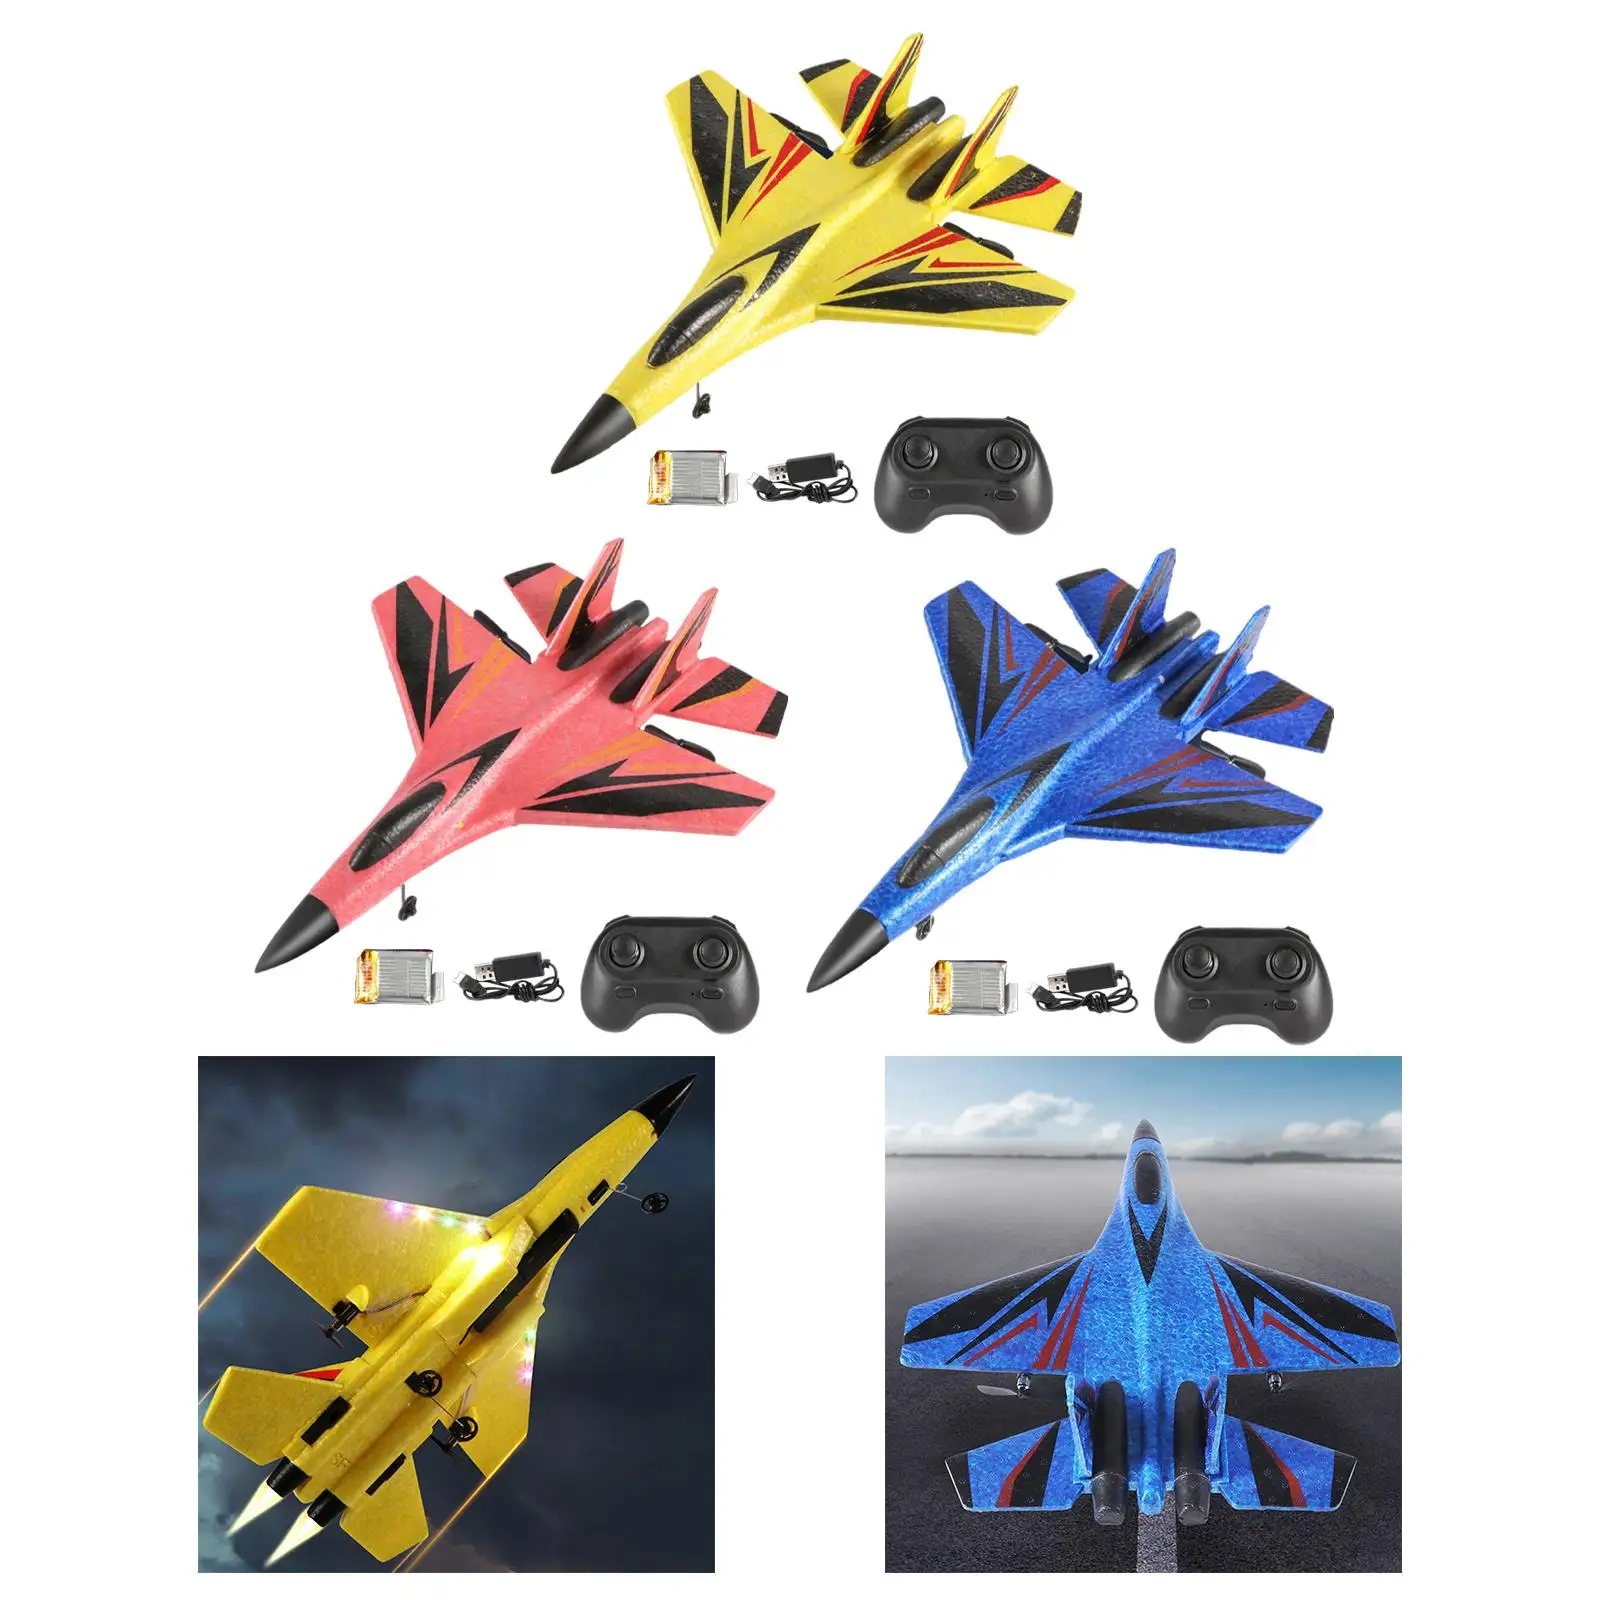 RC Airplane SU30 Aircraft Model Toys Easy to Control with Light Foam RC Glider for Boys Girls Children Adults Birthday Gifts